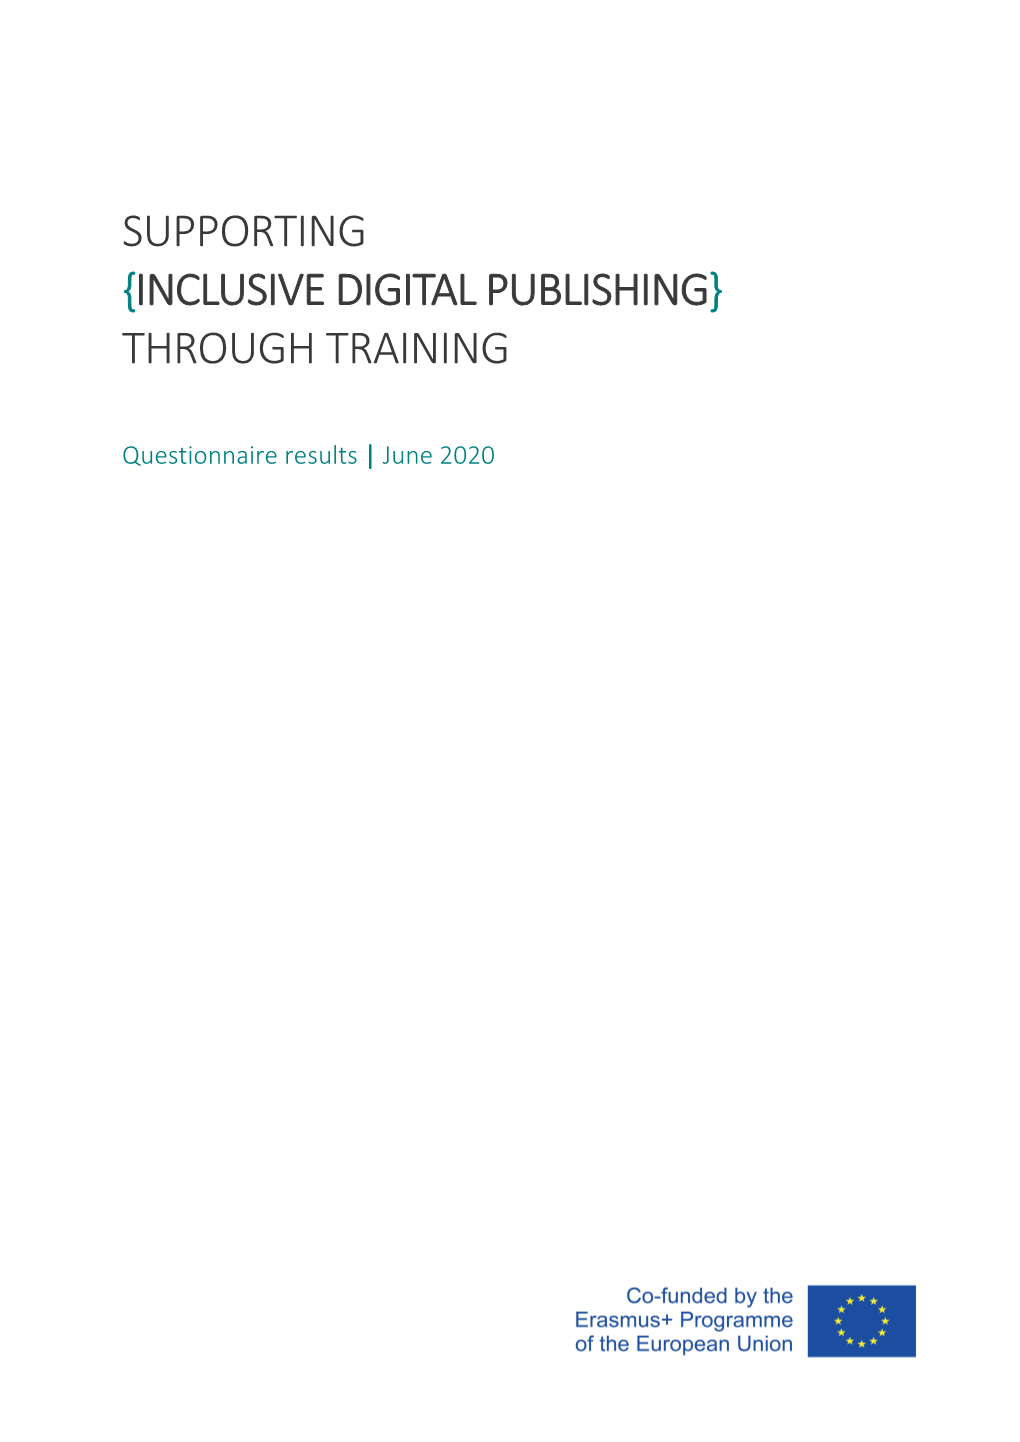 Supporting Inclusive Publishing Through Training | Questionnaire